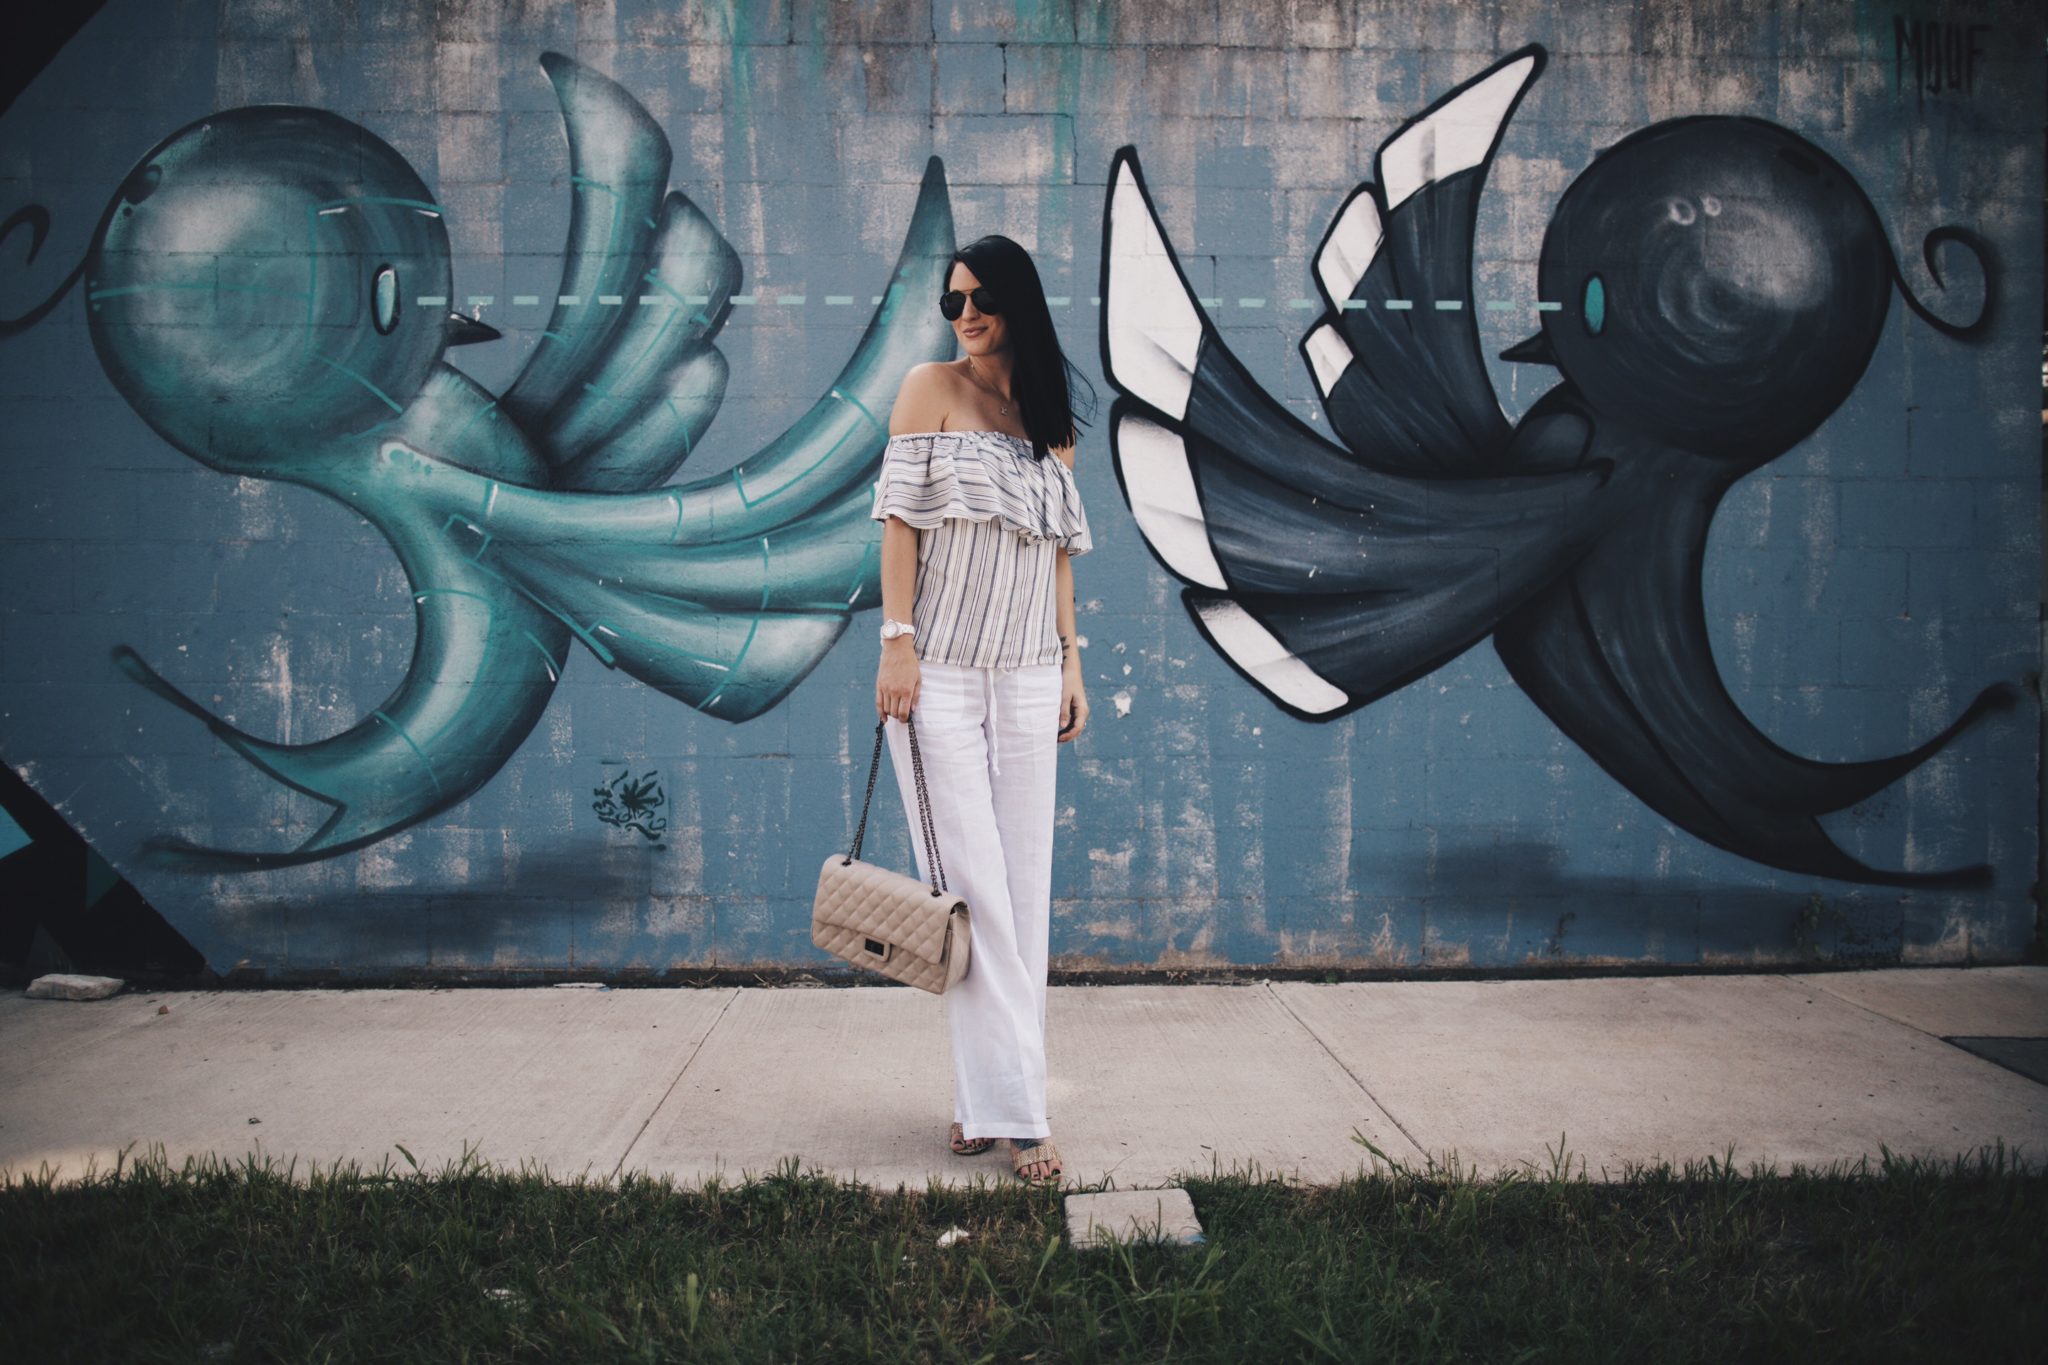 Off the Shoulder Top and Linen Pants | summer fashion tips | summer outfit ideas | summer style tips | what to wear for summer | warm weather fashion | fashion for summer | style tips for summer | outfit ideas for summer || Dressed to Kill